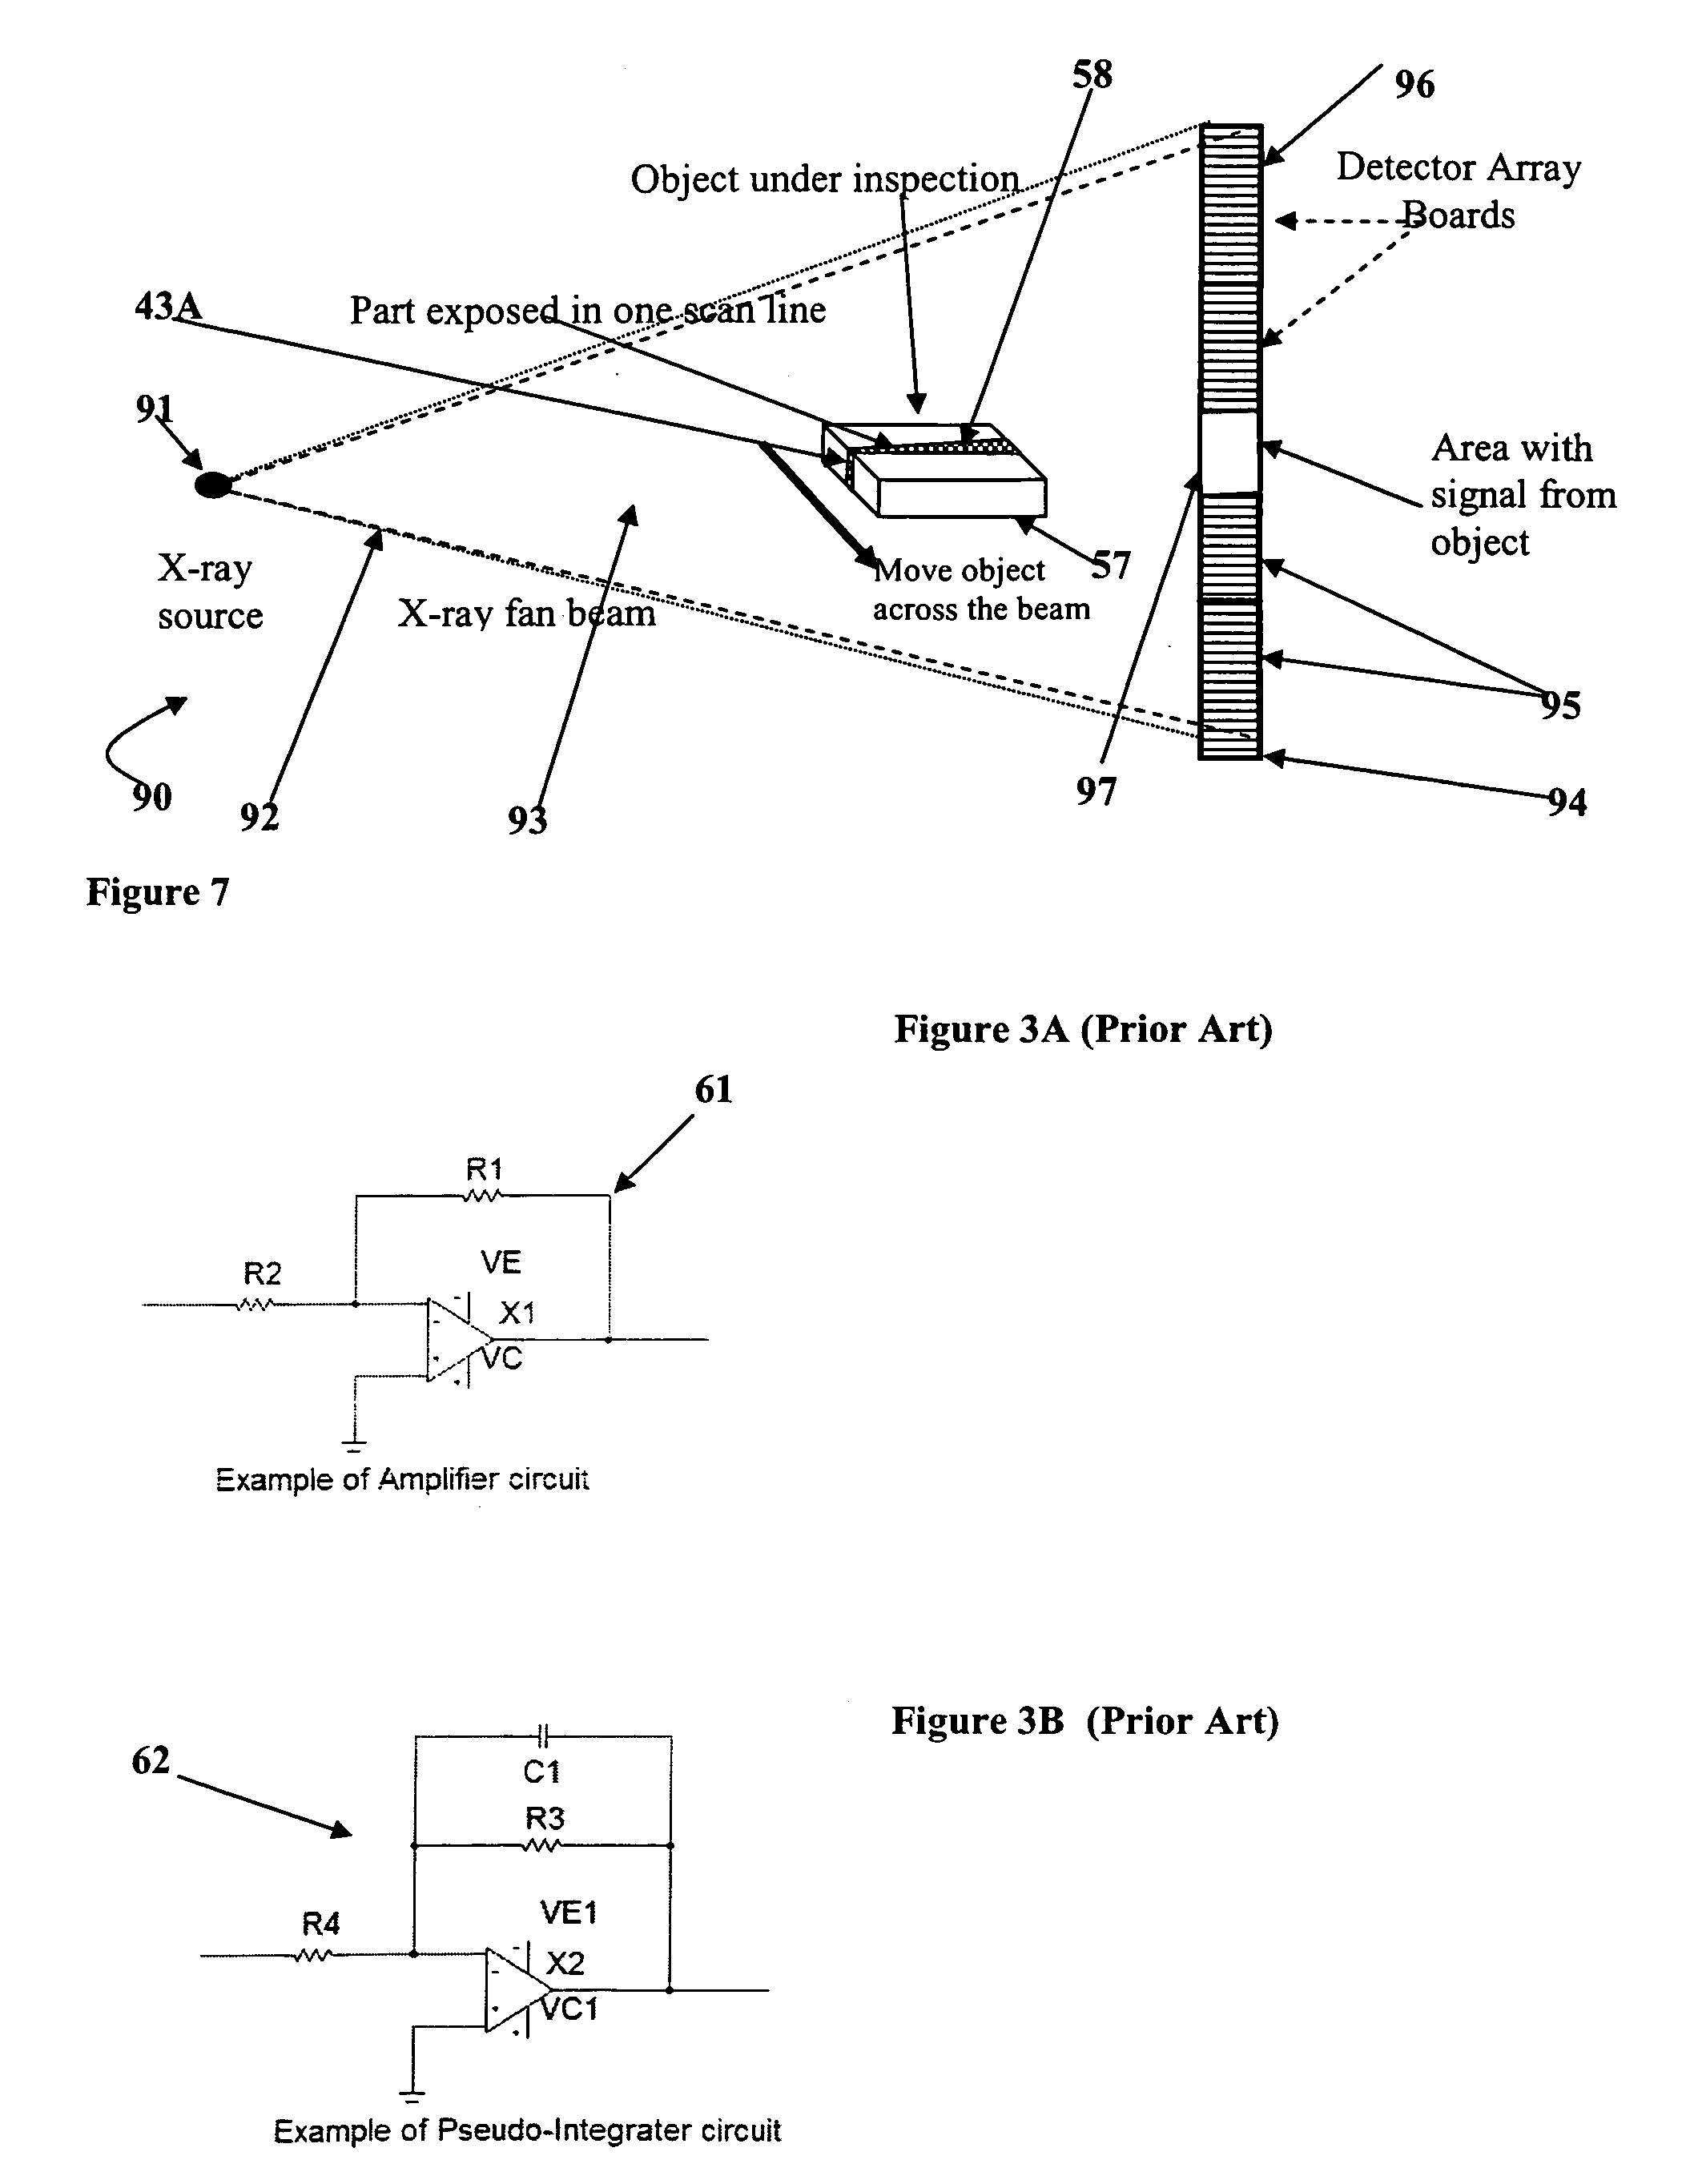 Time share digital integration method and apparatus for processing X-ray images